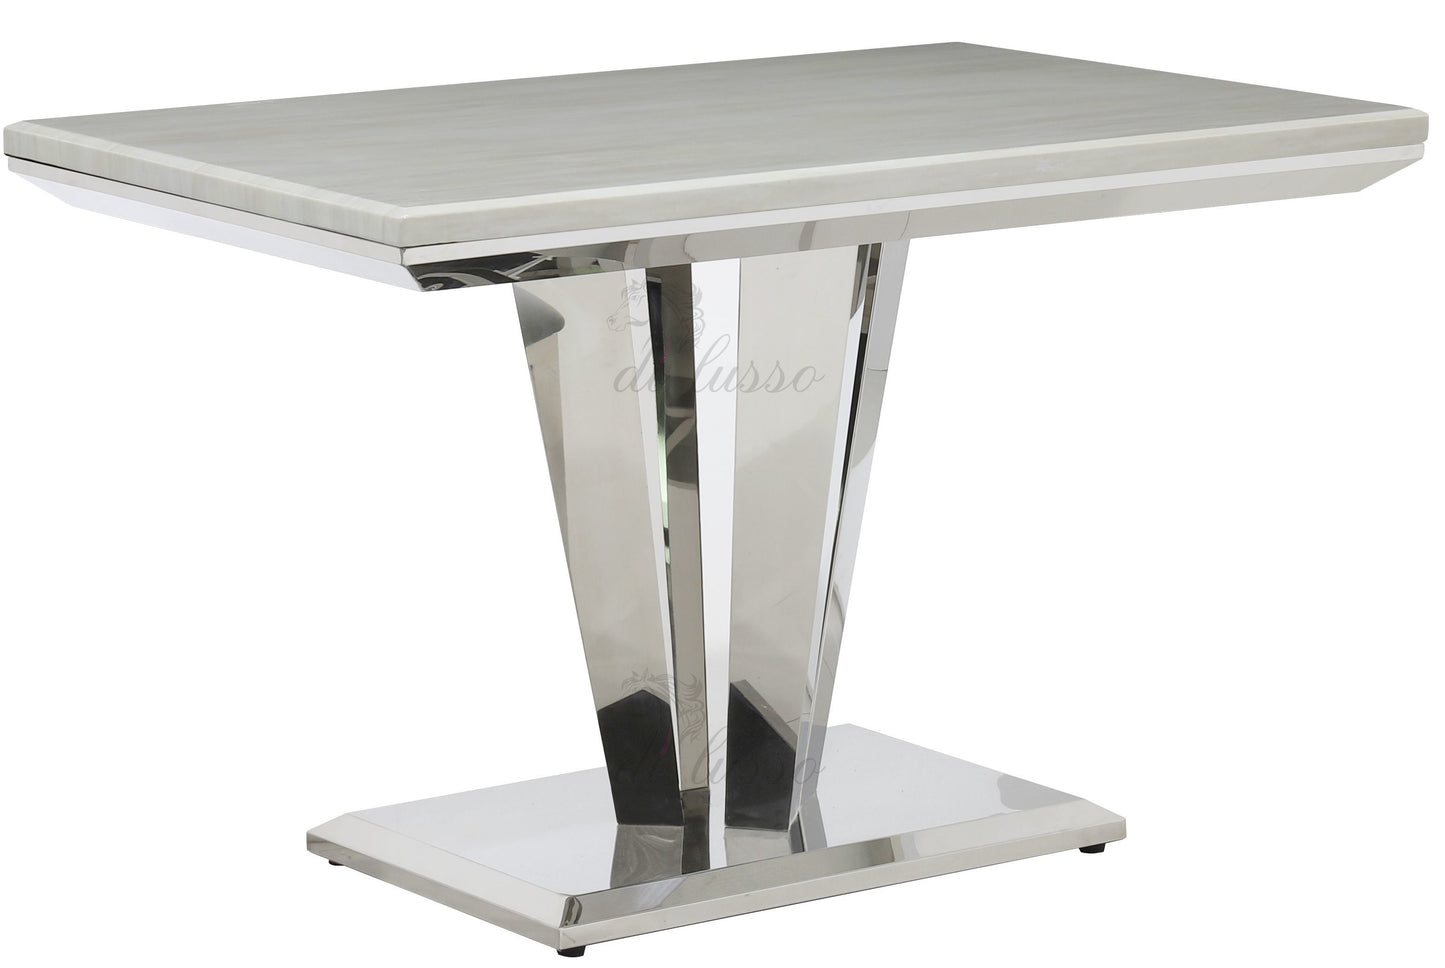 Cairo 120cm Marble Dining Table